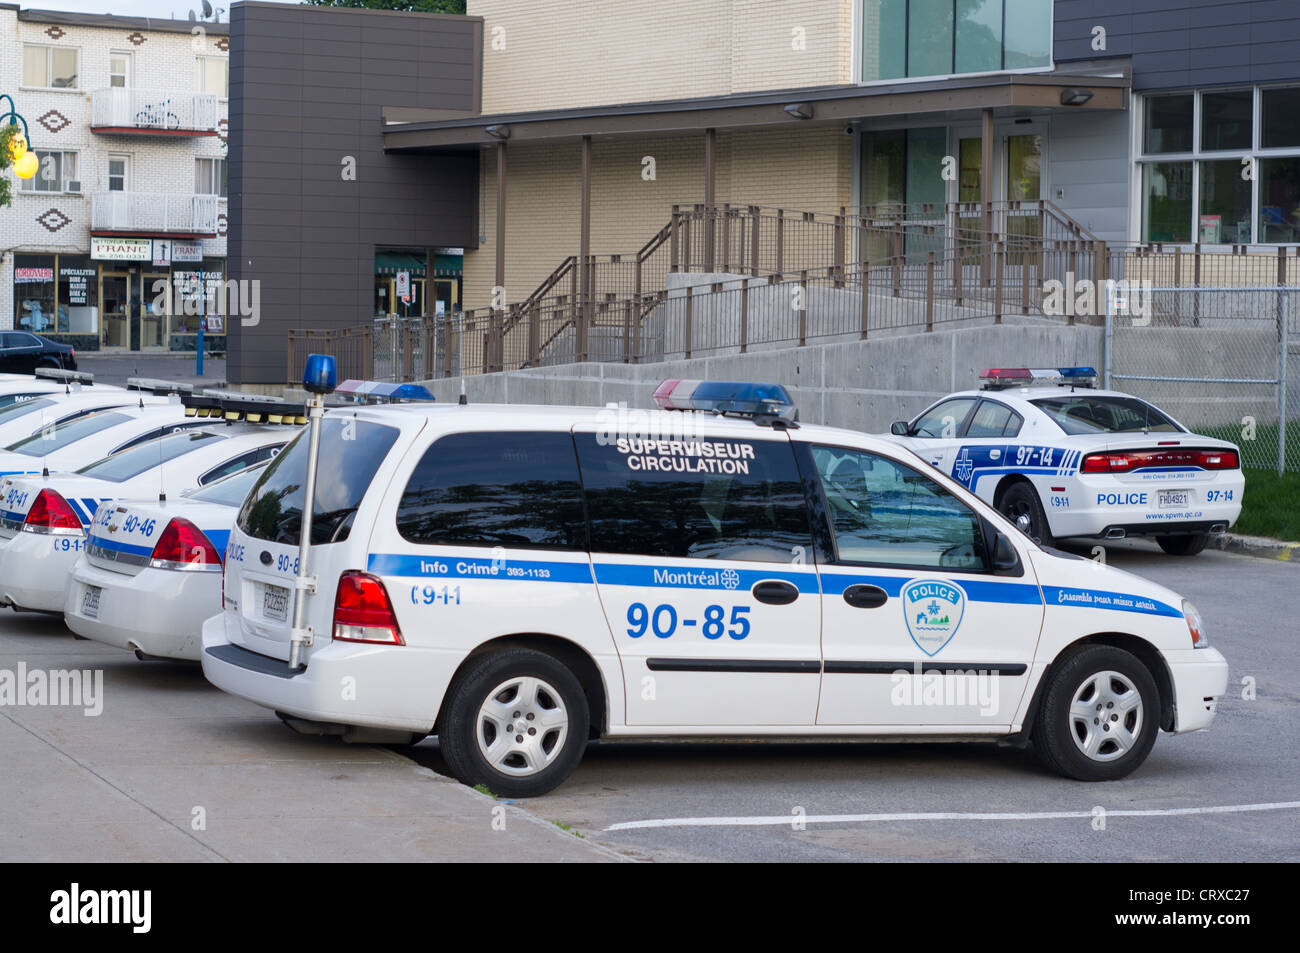 Montreal police station 90 parking, St-Leonard , Quebec, Canada Stock Photo